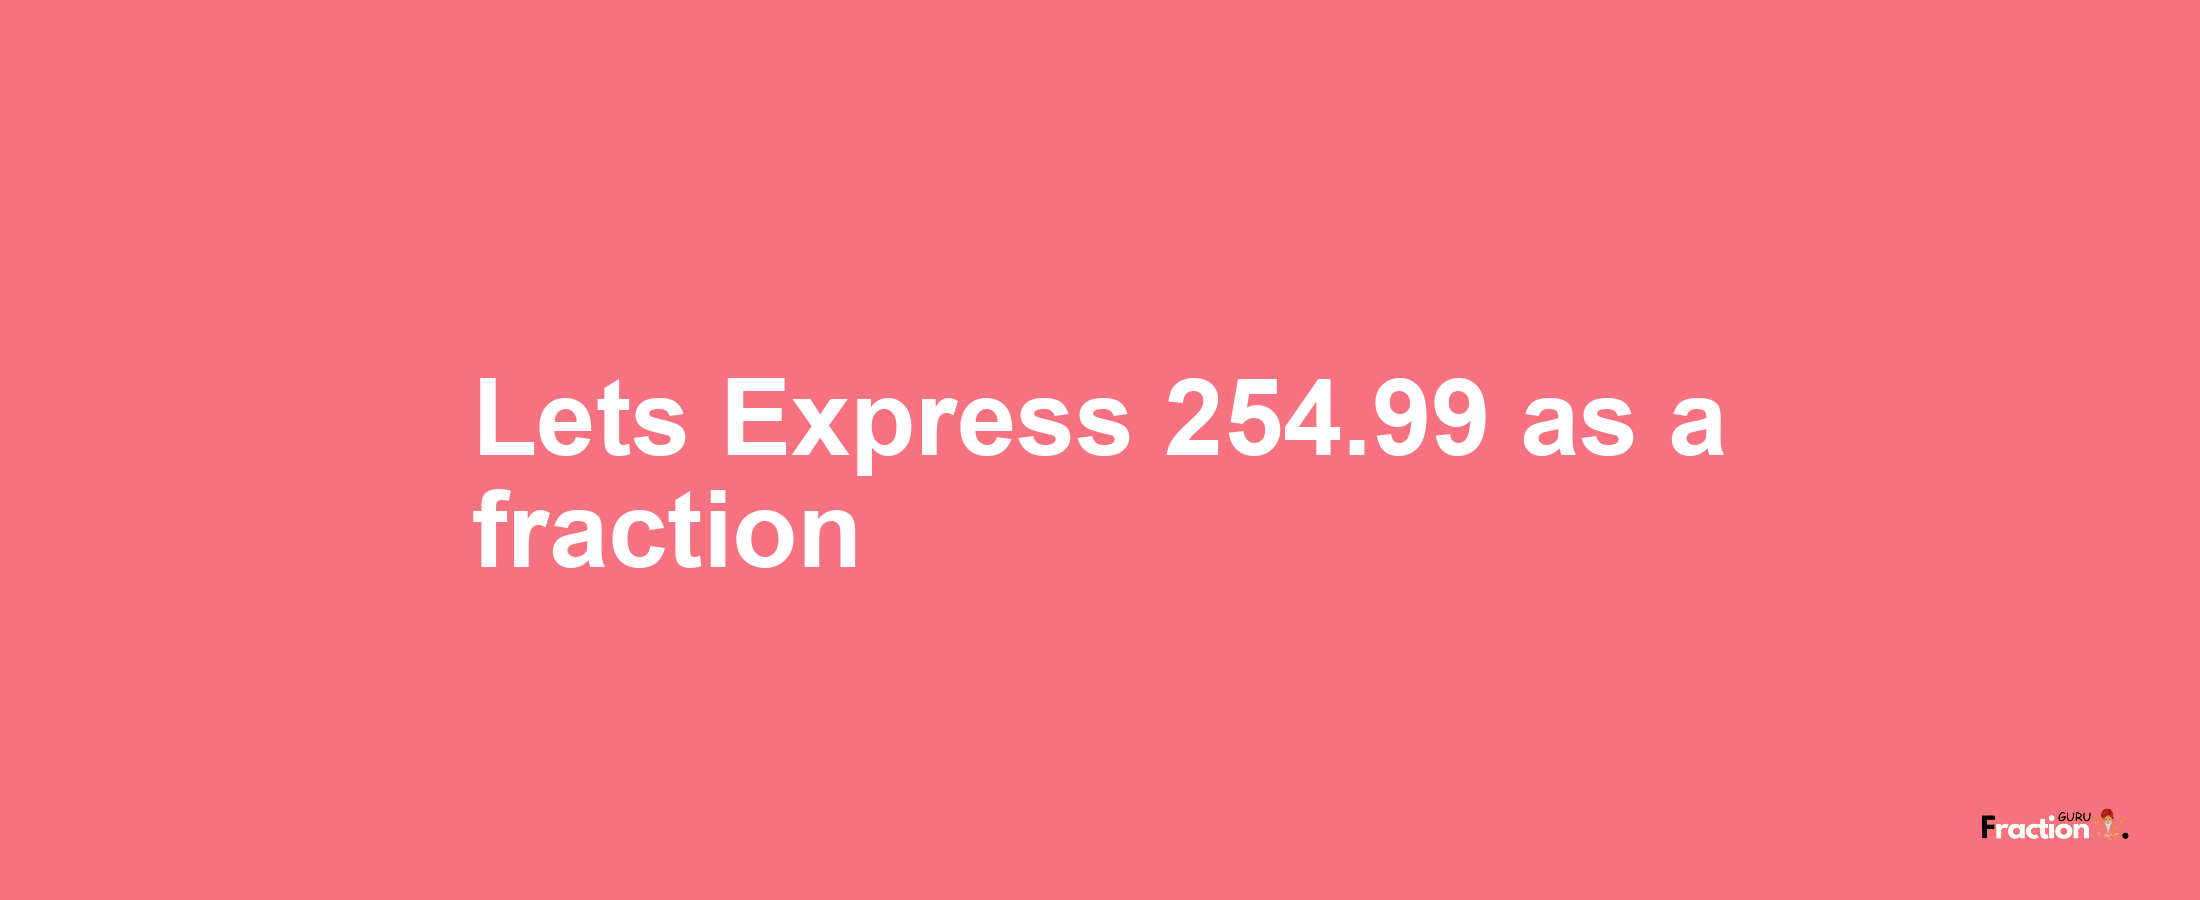 Lets Express 254.99 as afraction